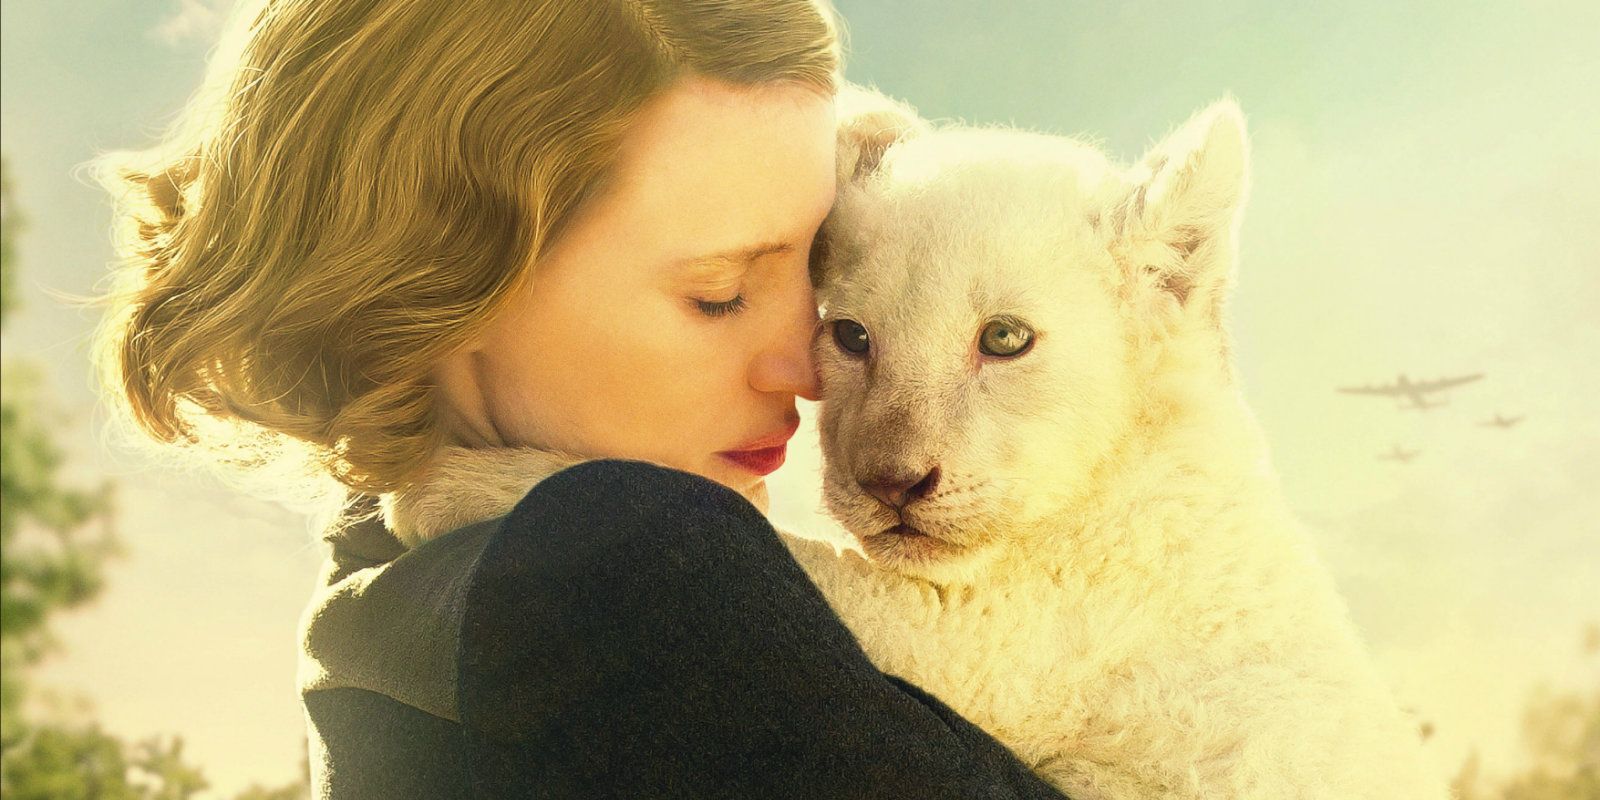 Pôster The Zookeeper's Wife (cortado) - Jessica Chastain